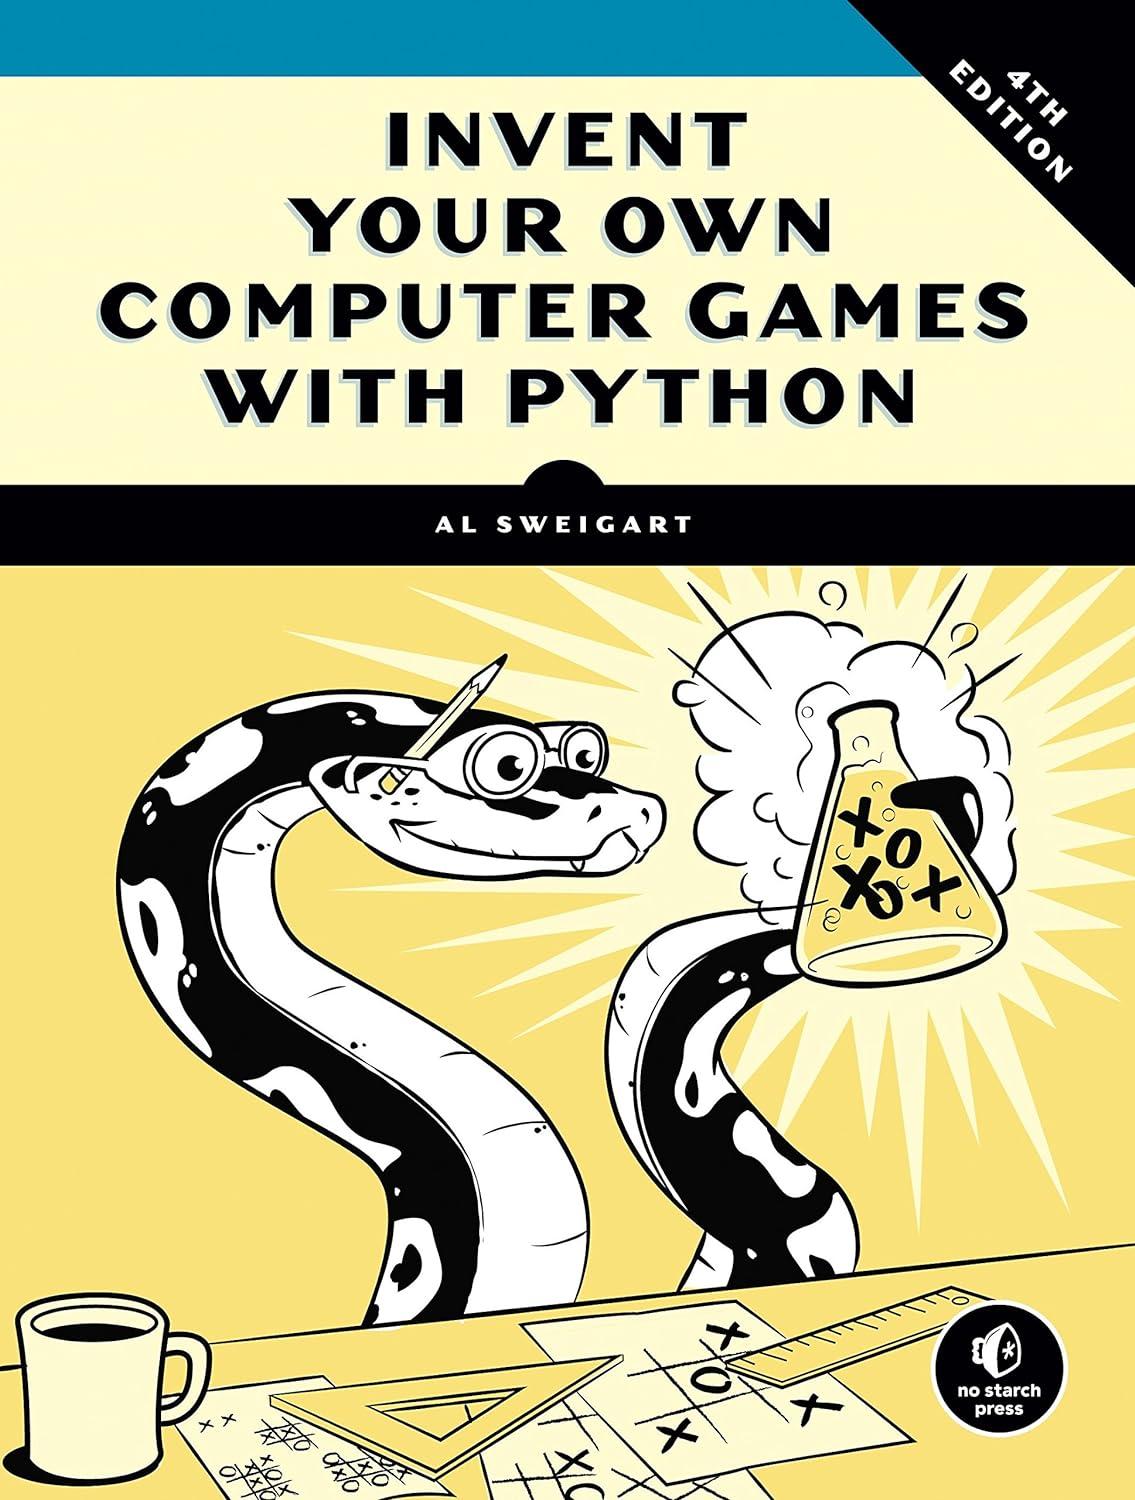 invent your own computer games with python 4th edition al sweigart 1593277954, 978-1593277956